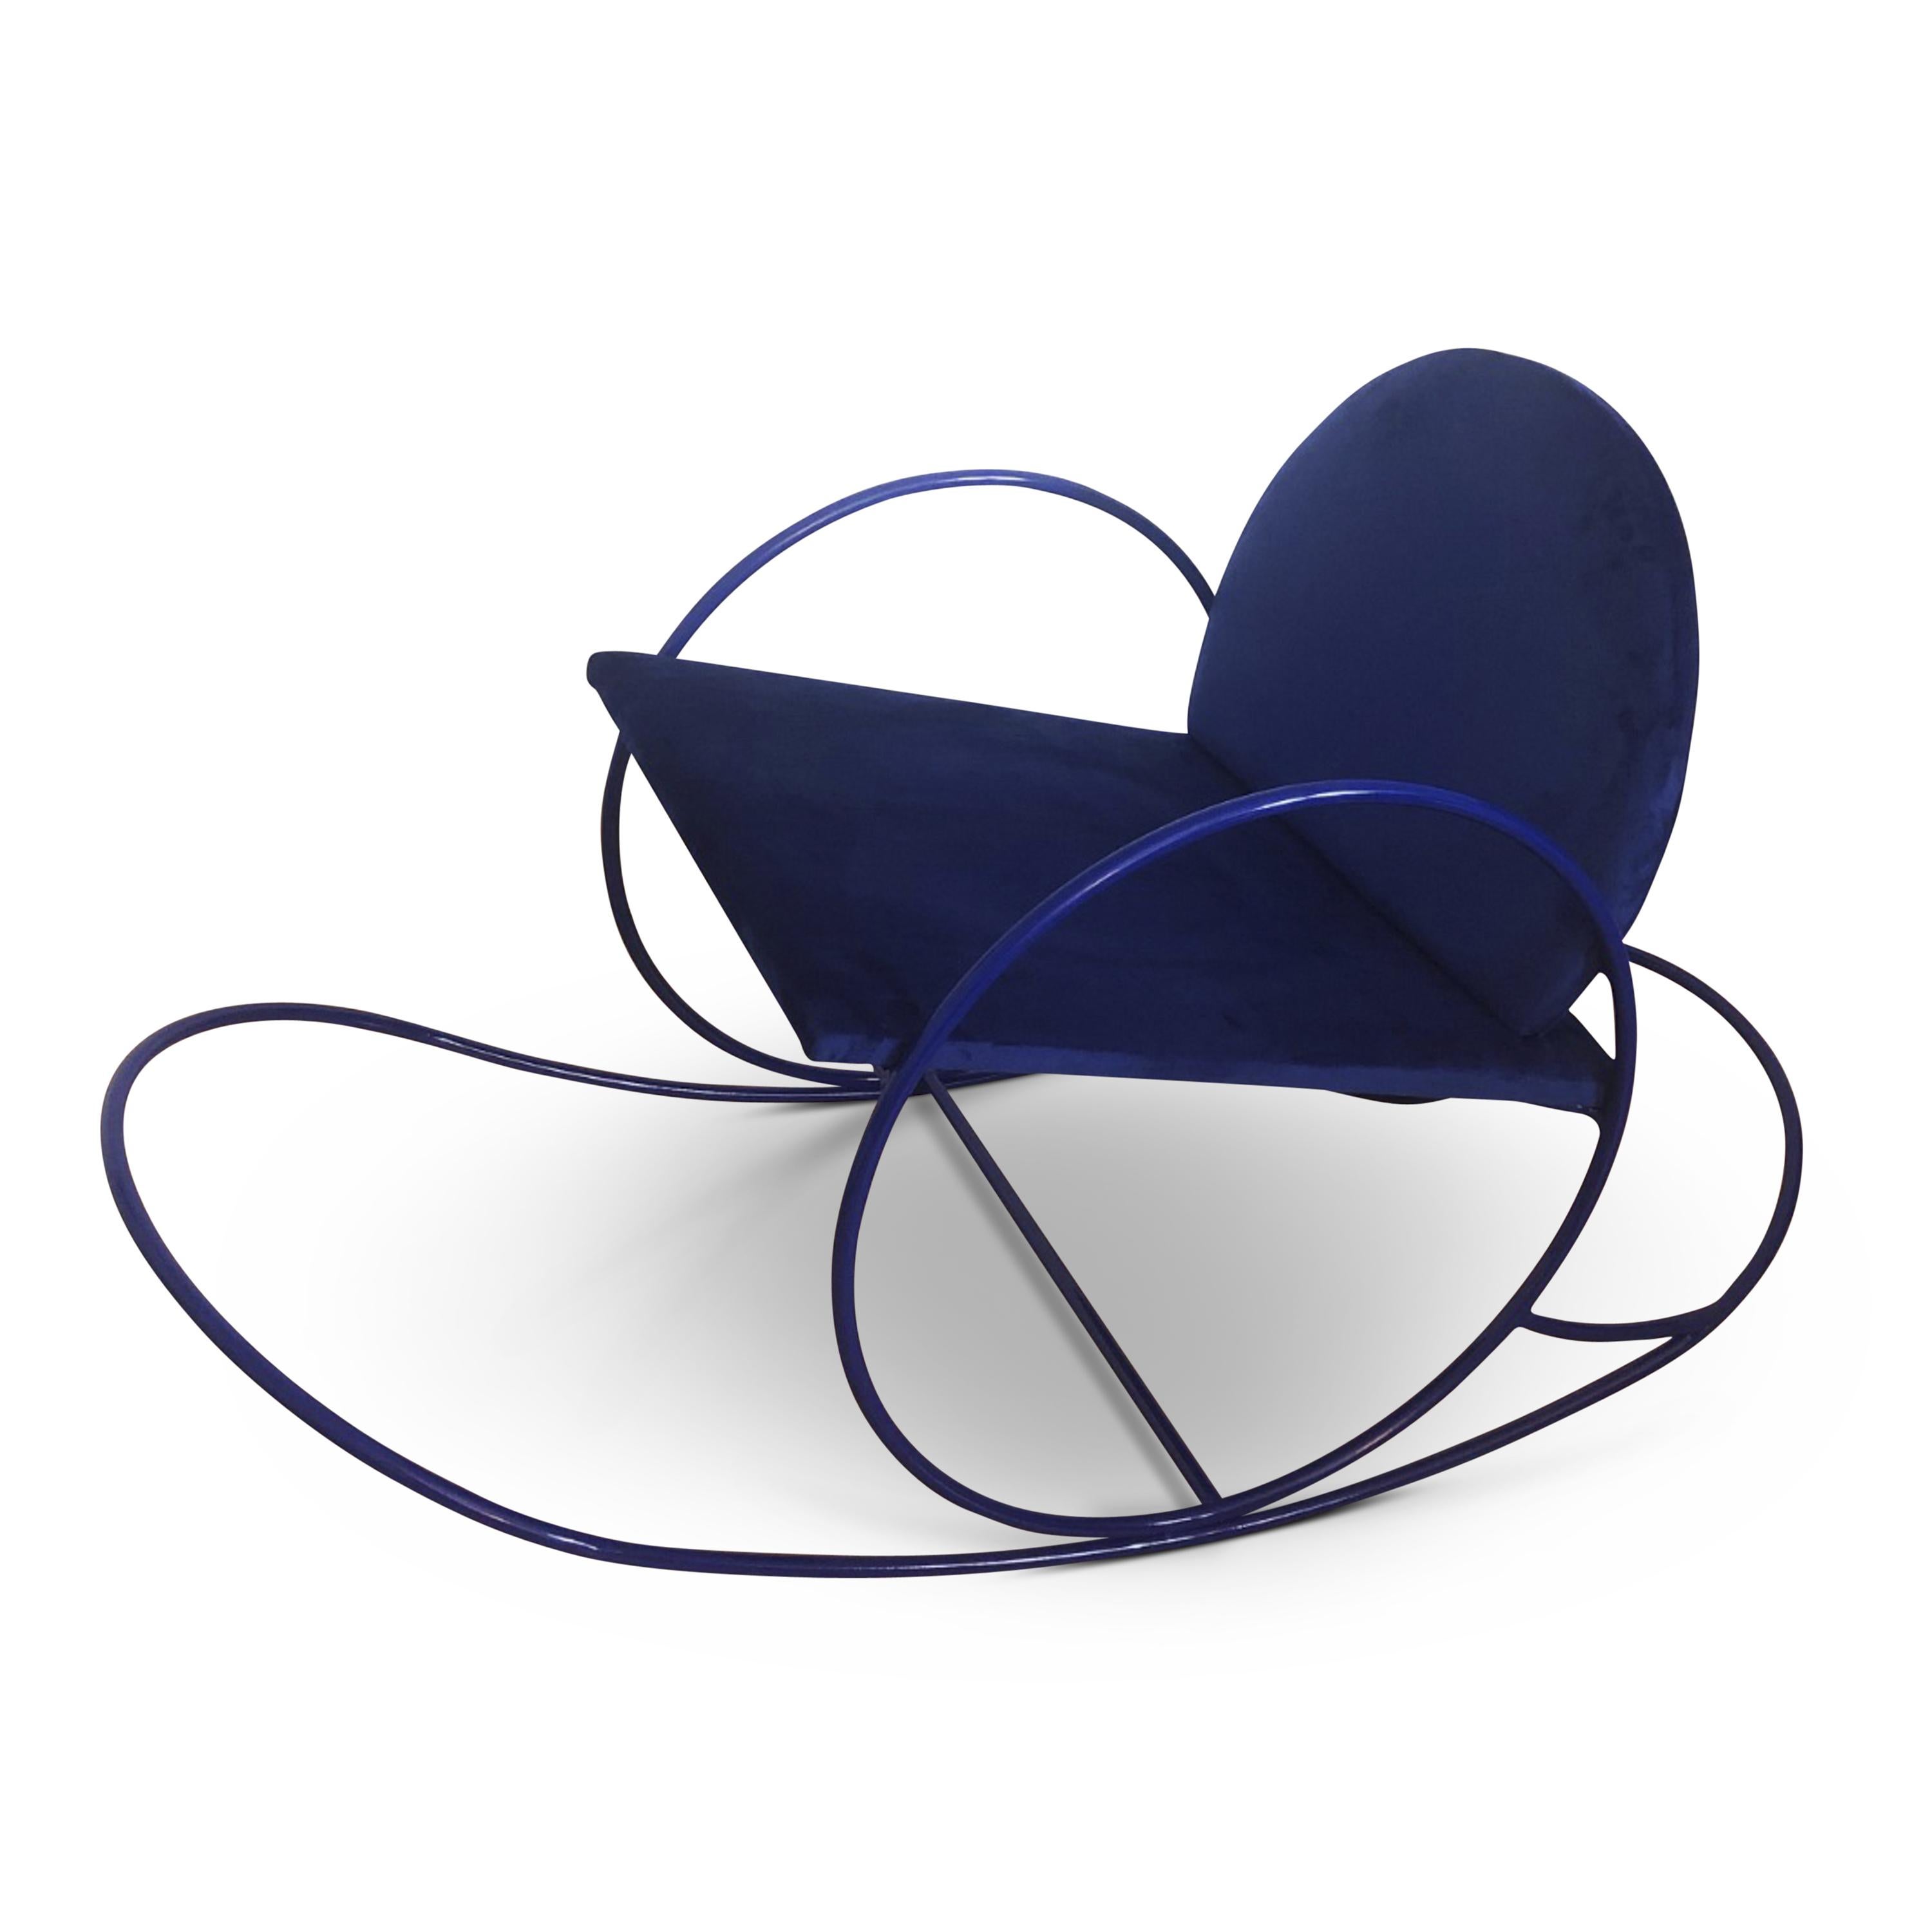 The armchair designed by Angel Mombiedro with a curved shape throughout its structure with a metal frame and seat and back upholstered in dark blue velvet.
     